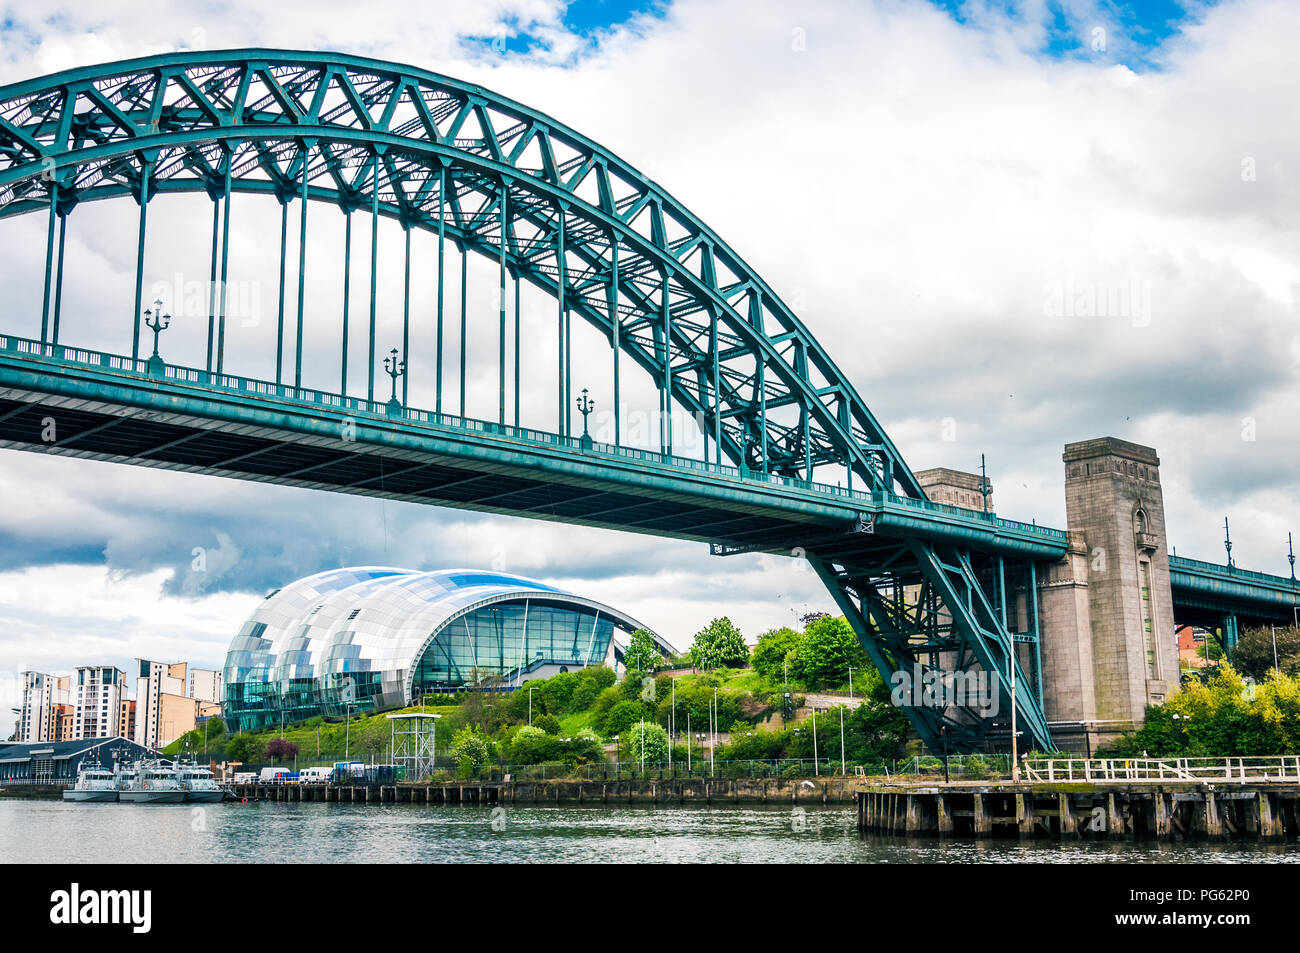 The Tyne bridge and the Sage centre in the background in Newcastle, England, UK Stock Photo